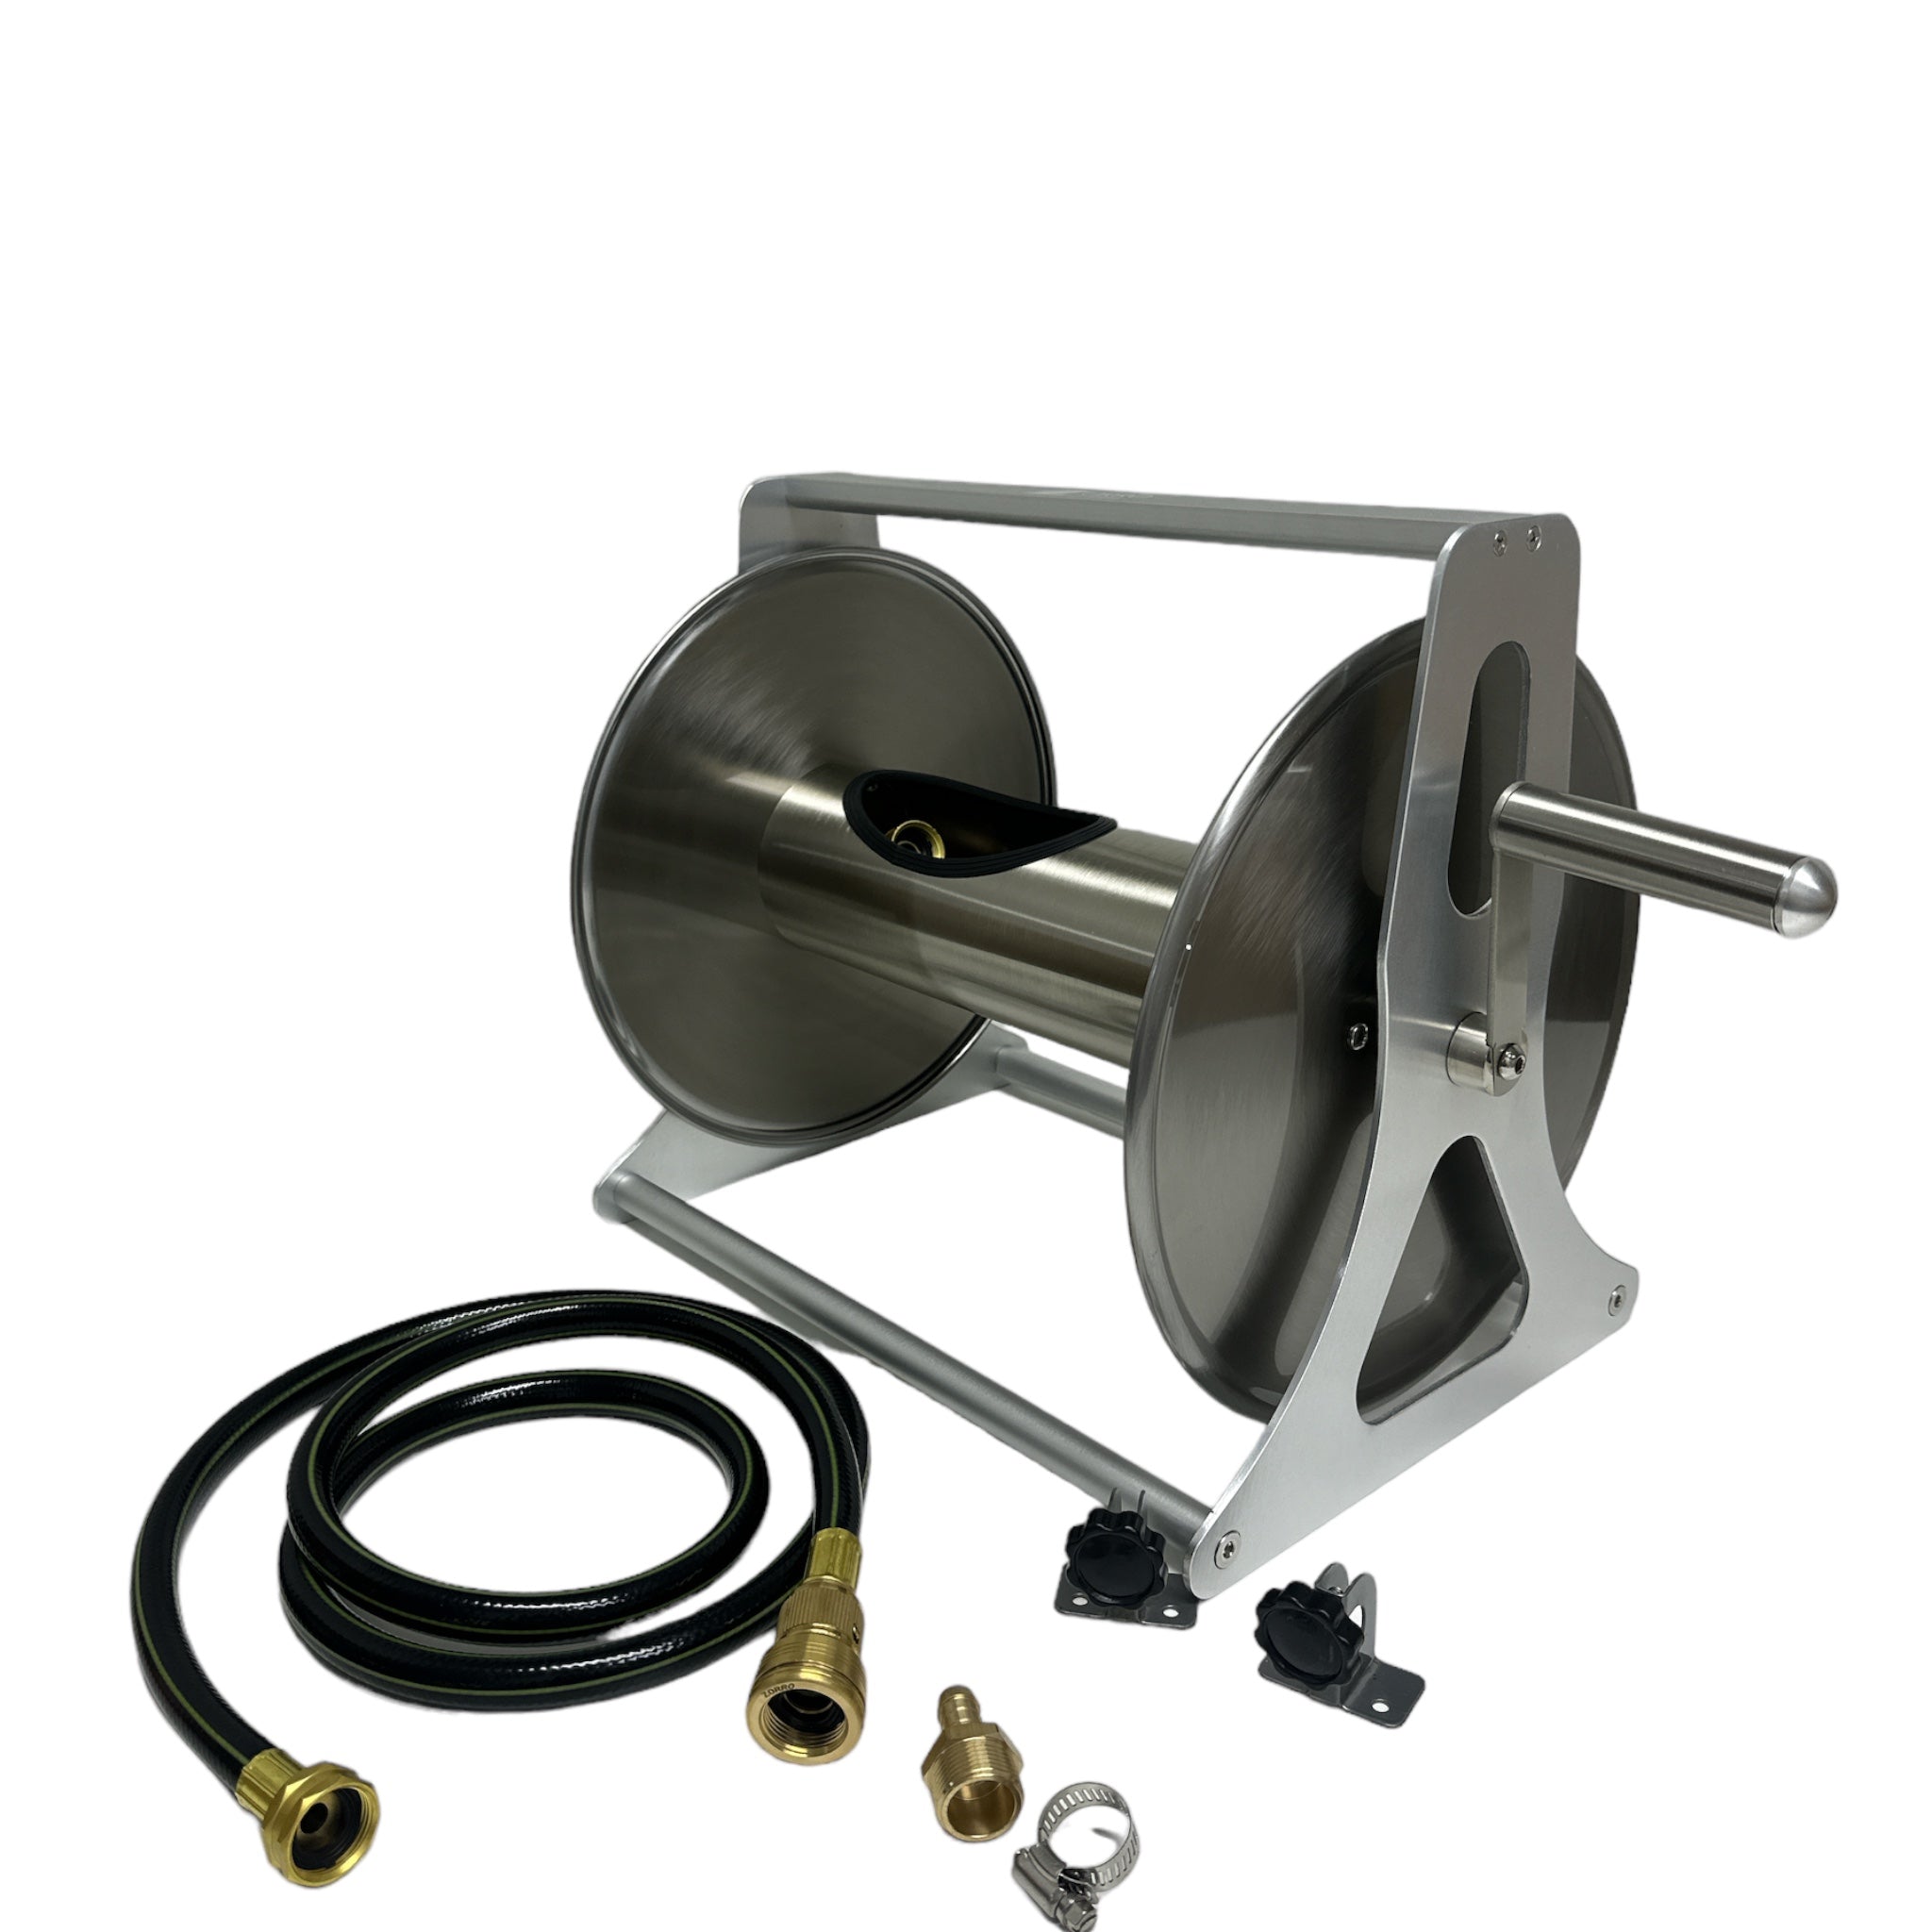 ZORRO Stainless Steel Hose Reel & 20 Mt Hose Bundle with 1.8mt Extension  hose and Brass Fittings. - ZORRO Australia